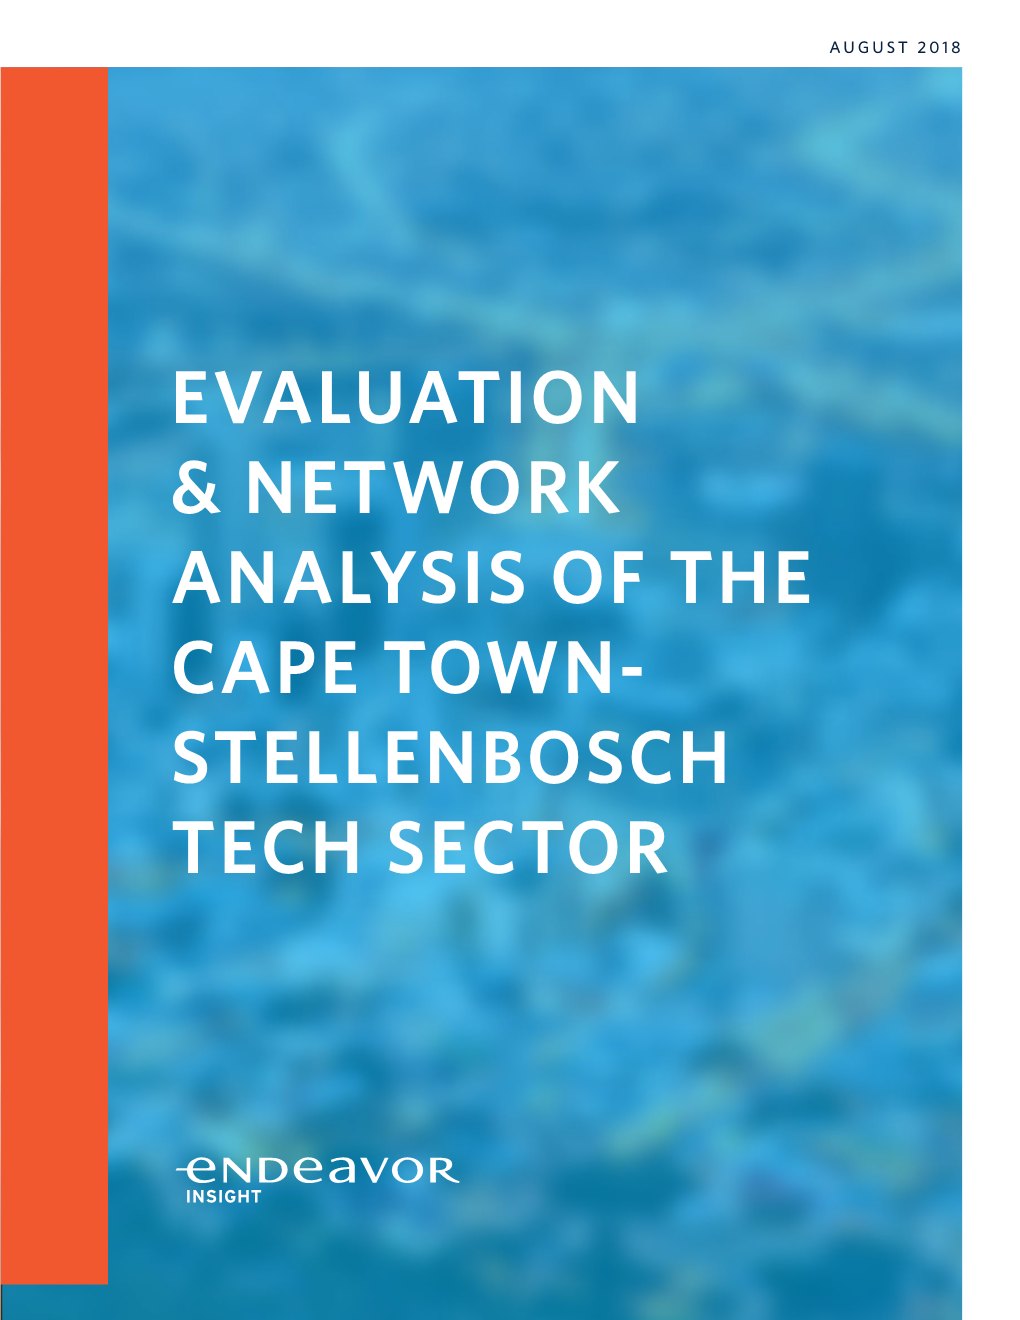 Evaluation & Network Analysis of the Cape Town-Stellenbosch Tech Sector